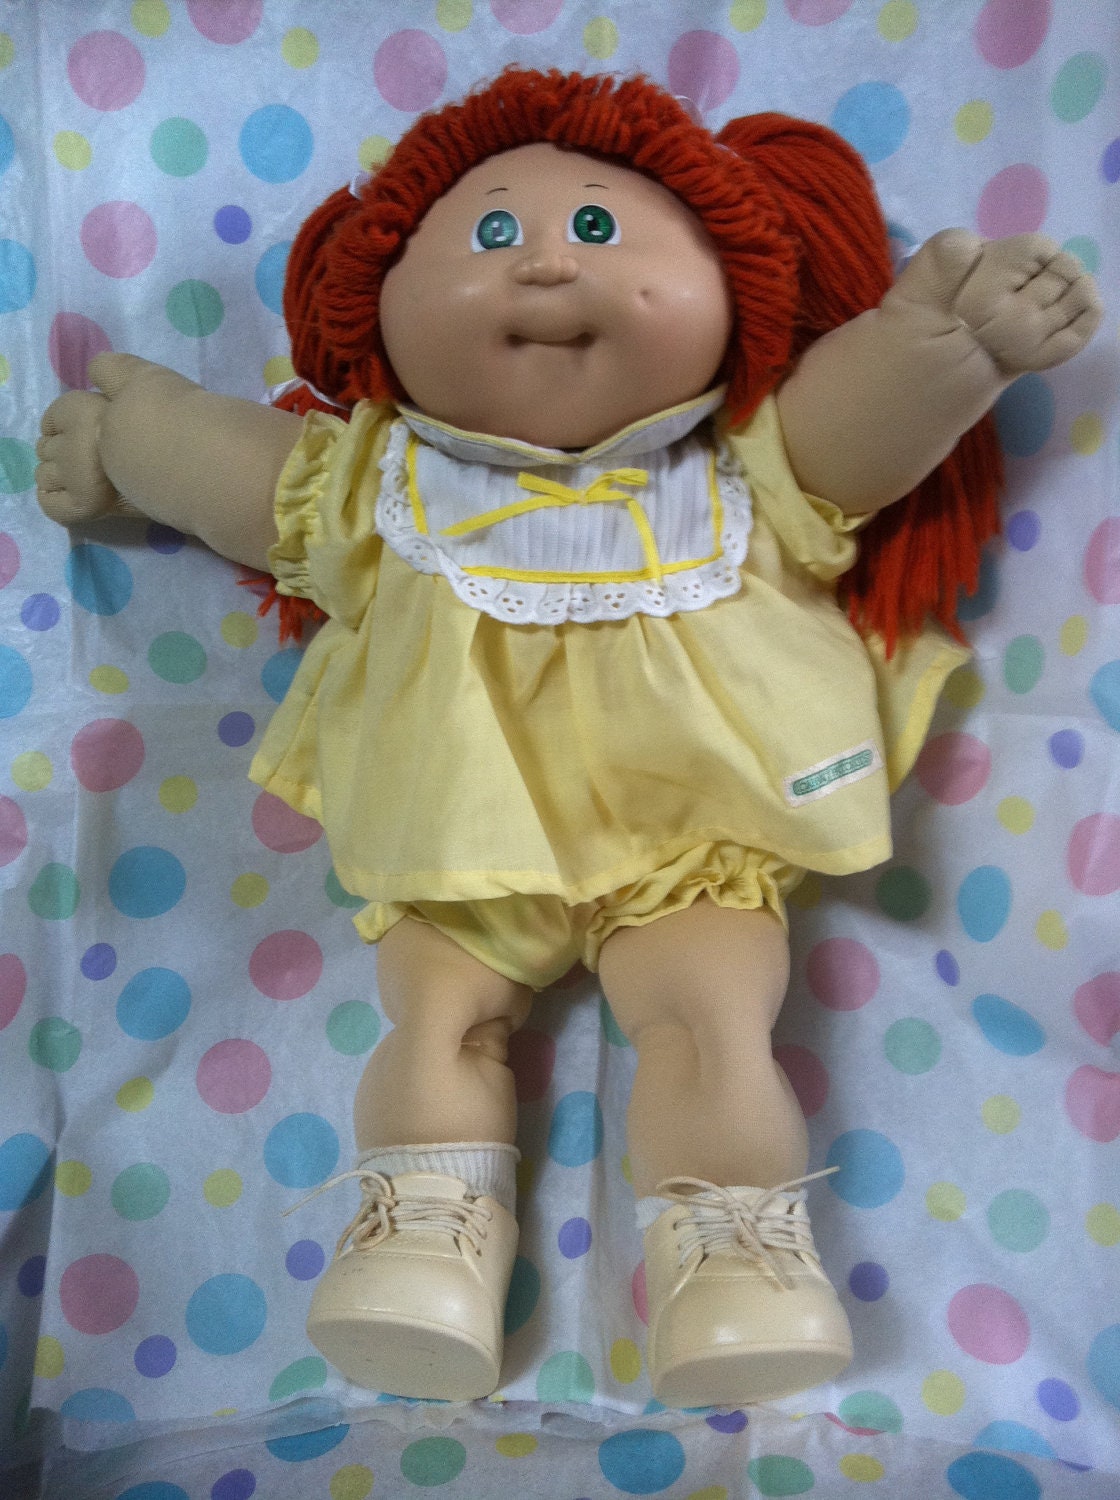 This EXACT Cabbage Patch doll is the one my dad bought me for my 7th ...